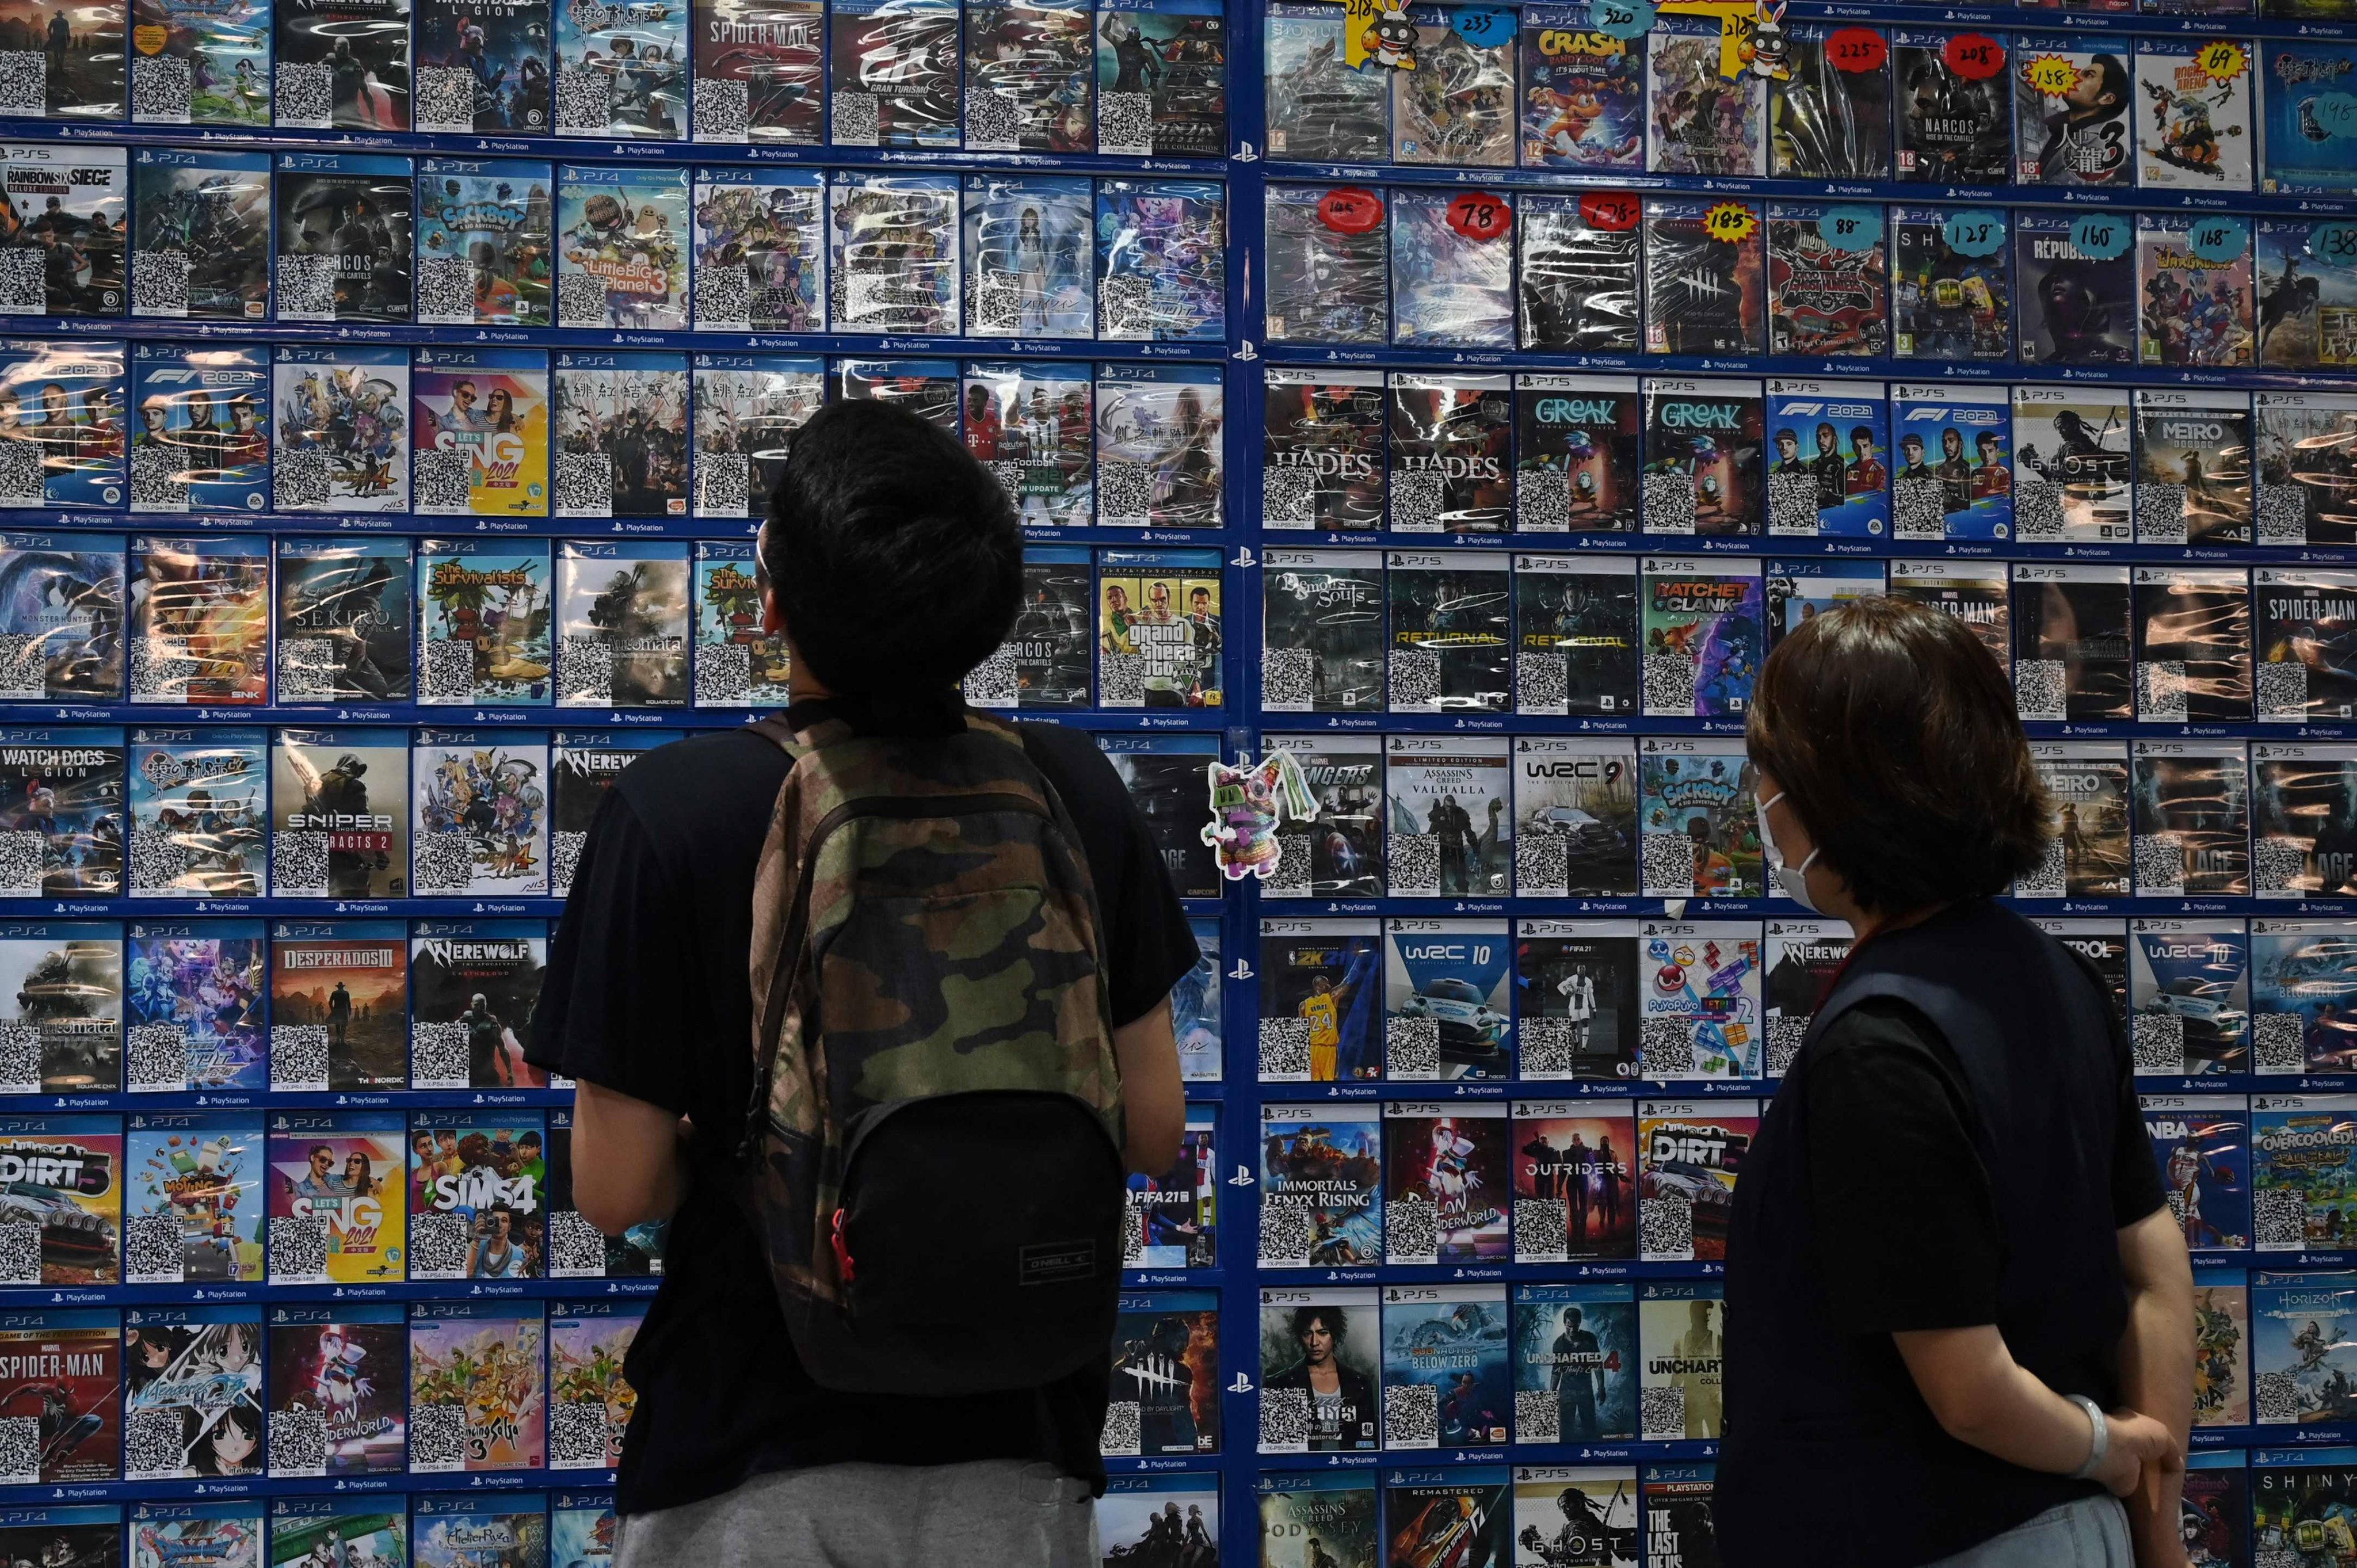 China approves new online games as crackdown eases